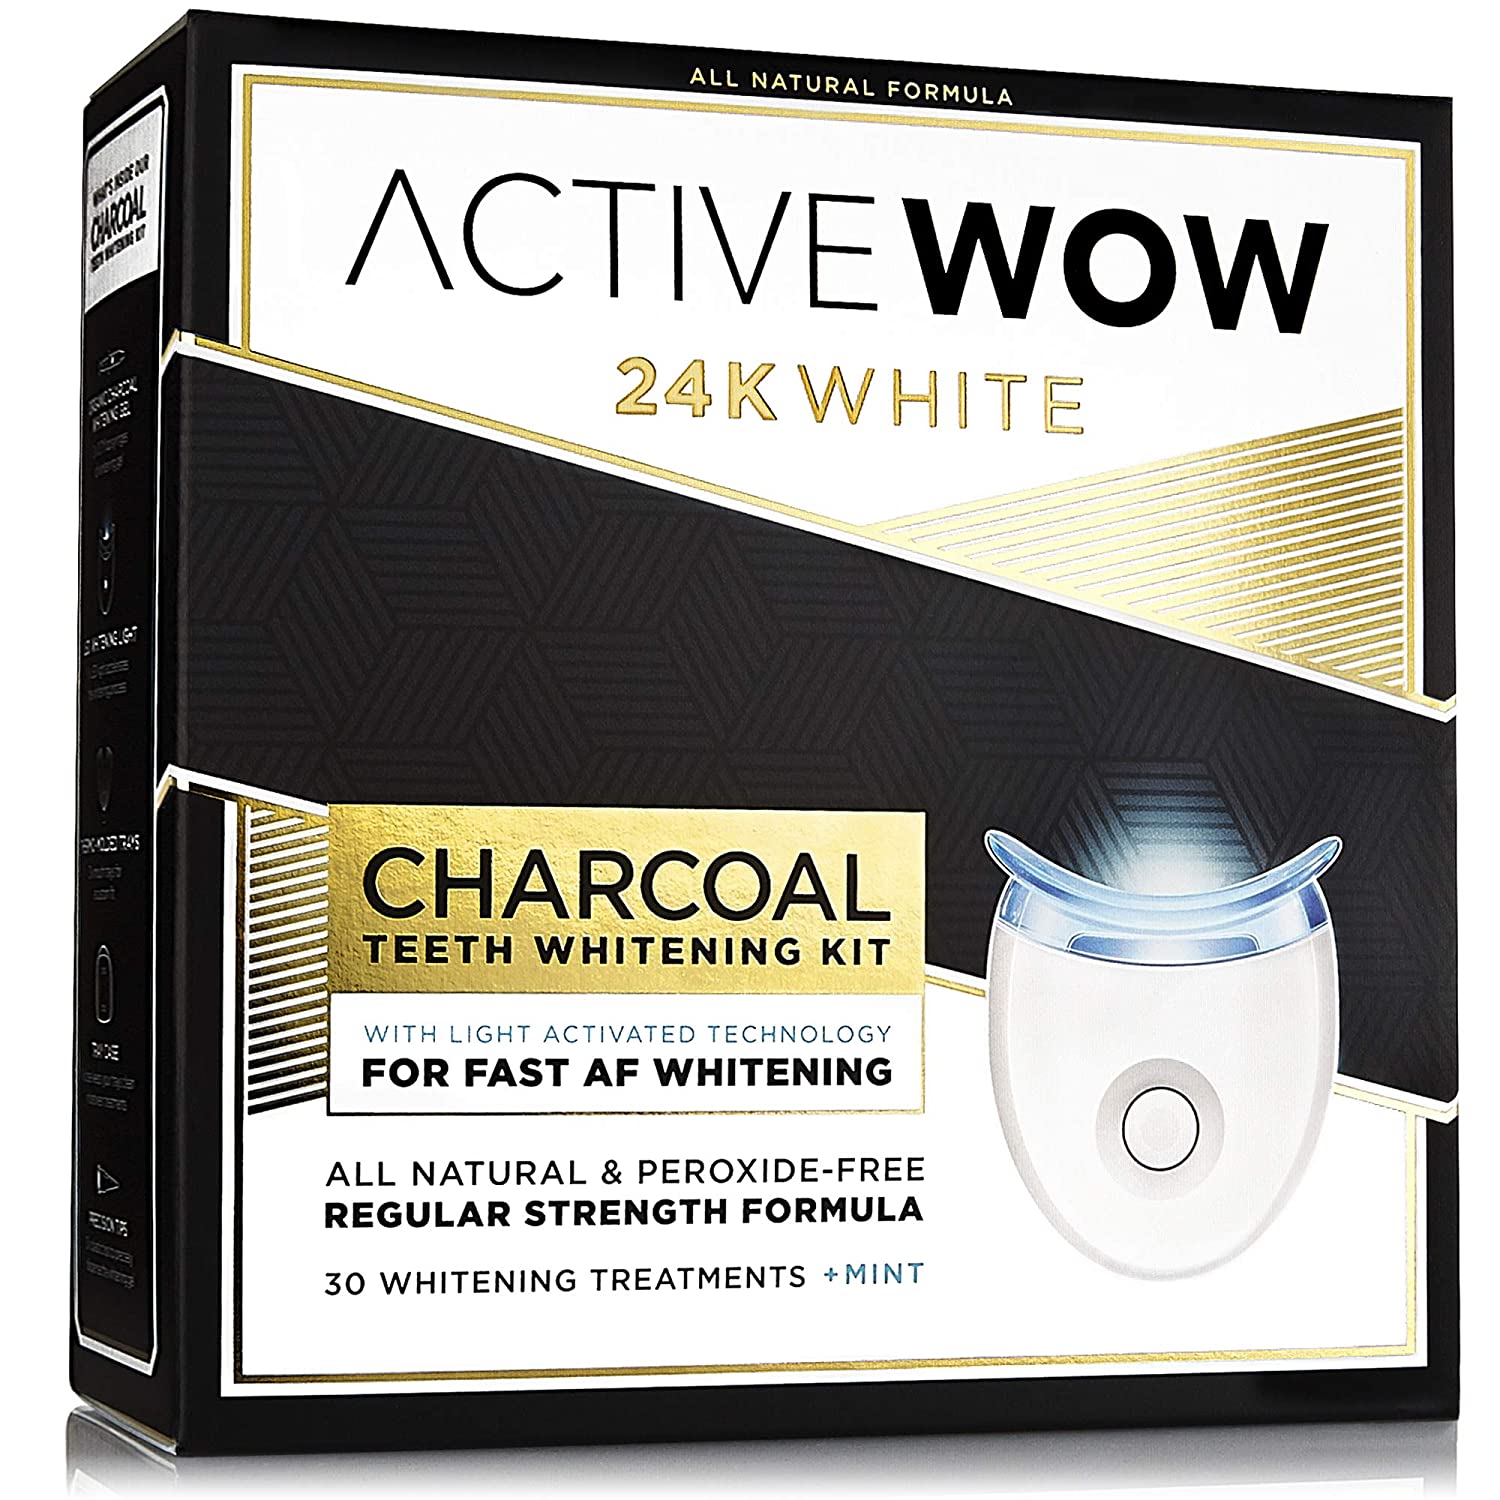 Active Wow Natural Charcoal Teeth Whitening Kit